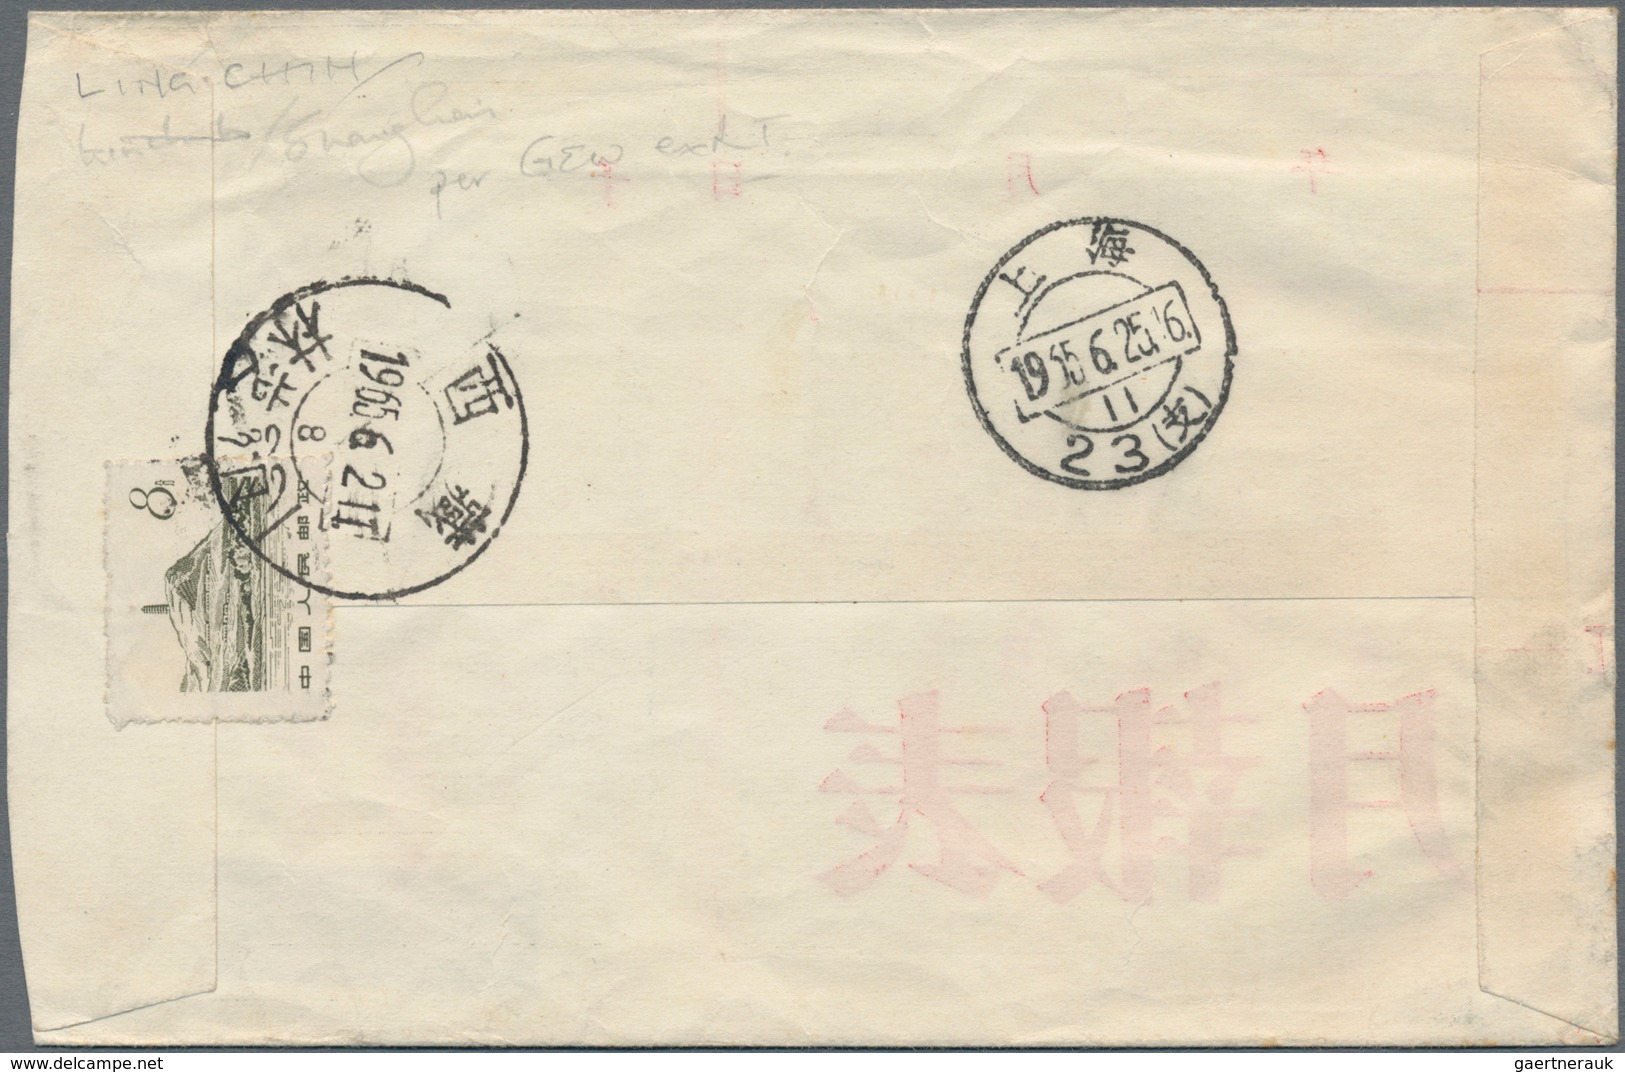 China - Volksrepublik: 1956/74, used in Tibet or Tibet to Nepal: covers (26) and stationery envelope